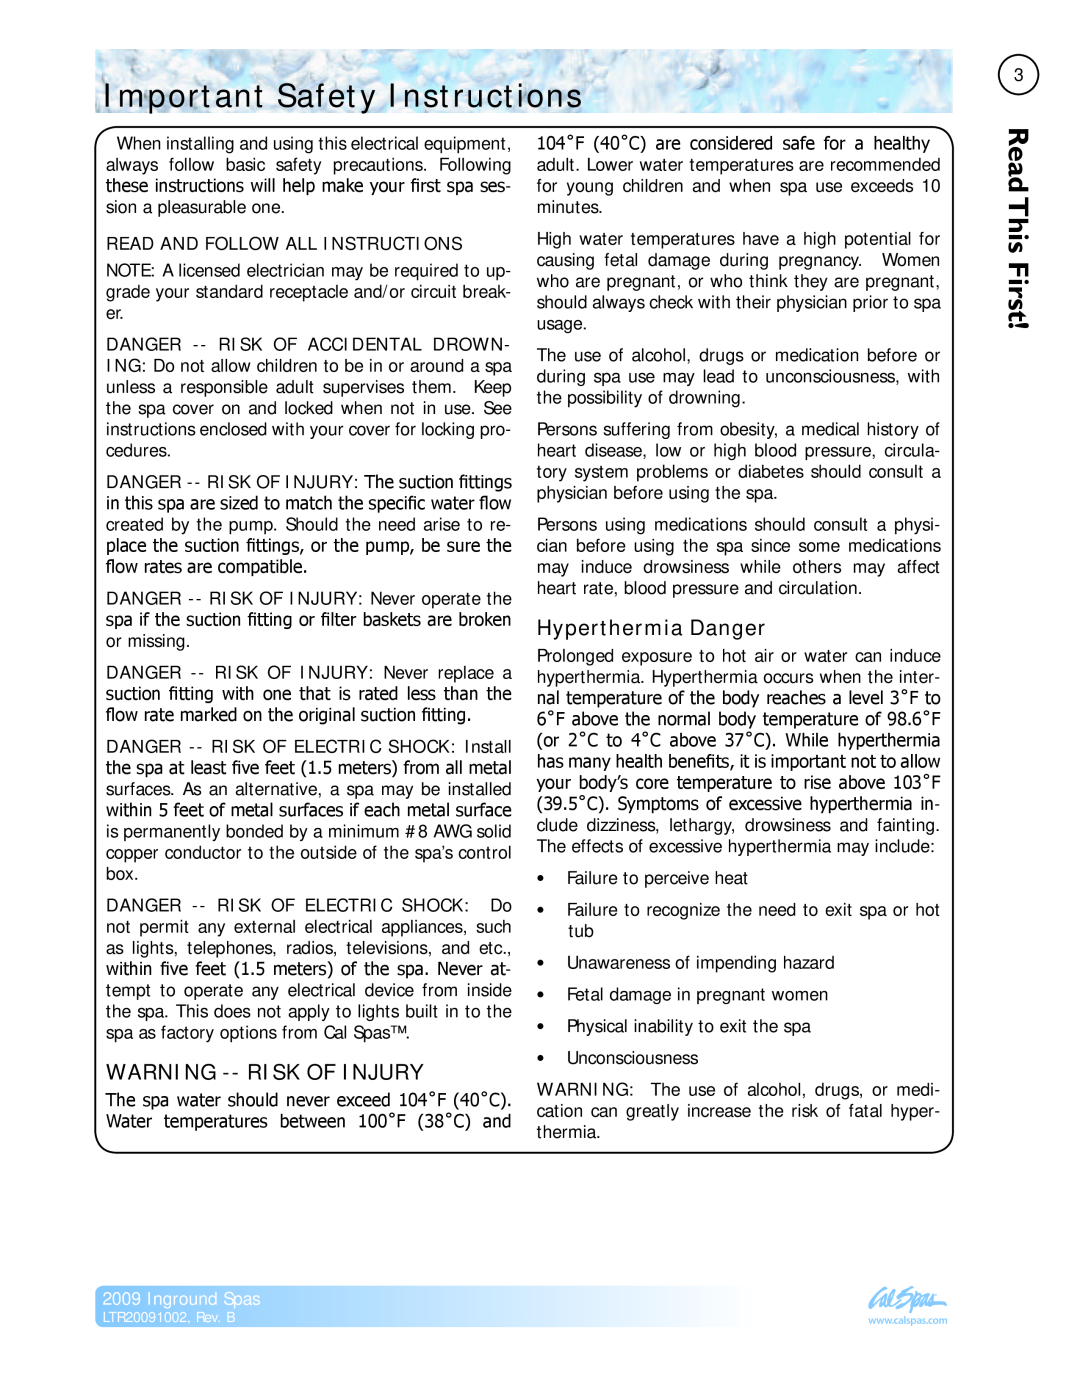 Cal Spas Inground Spas manual Important Safety Instructions, Read This First, Warning --Risk Of Injury, Hyperthermia Danger 